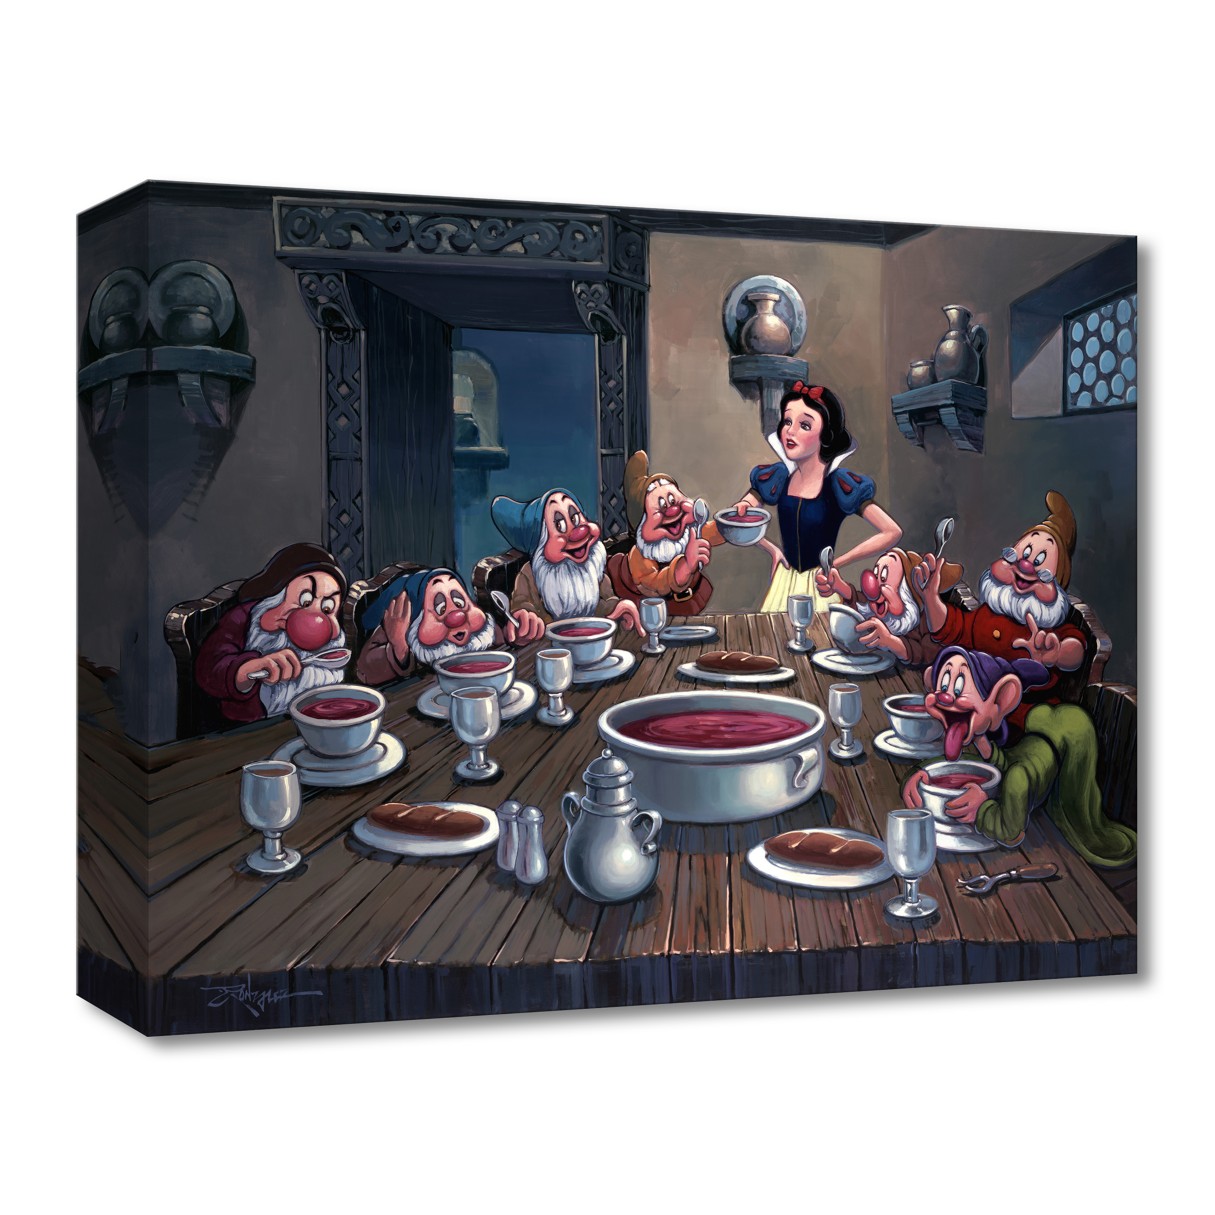 Snow White and the Seven Dwarfs ''Soup for Seven'' Giclée on Canvas by Rodel Gonzalez – Limited Edition